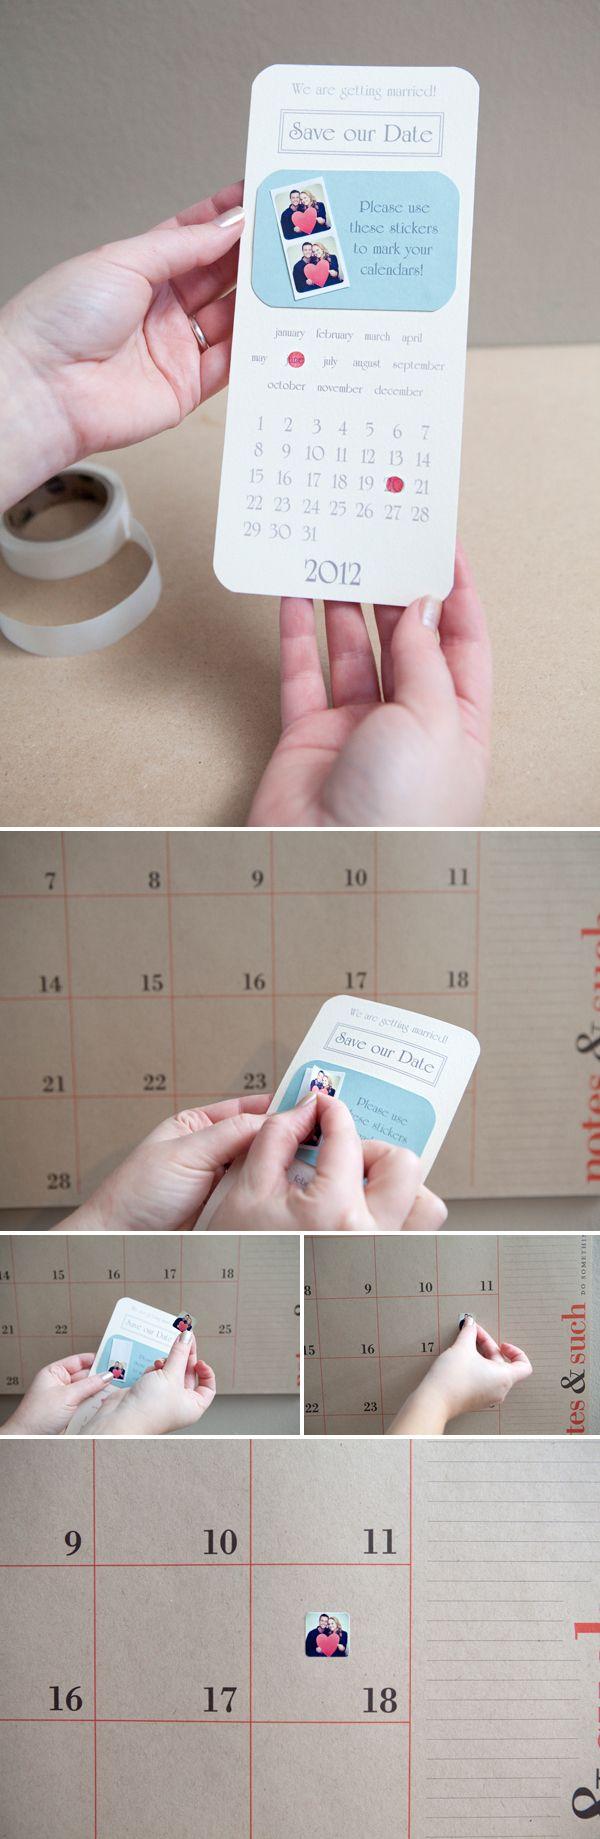 Mariage - How To Make Super Cute DIY Instagram Save The Date Invitations!